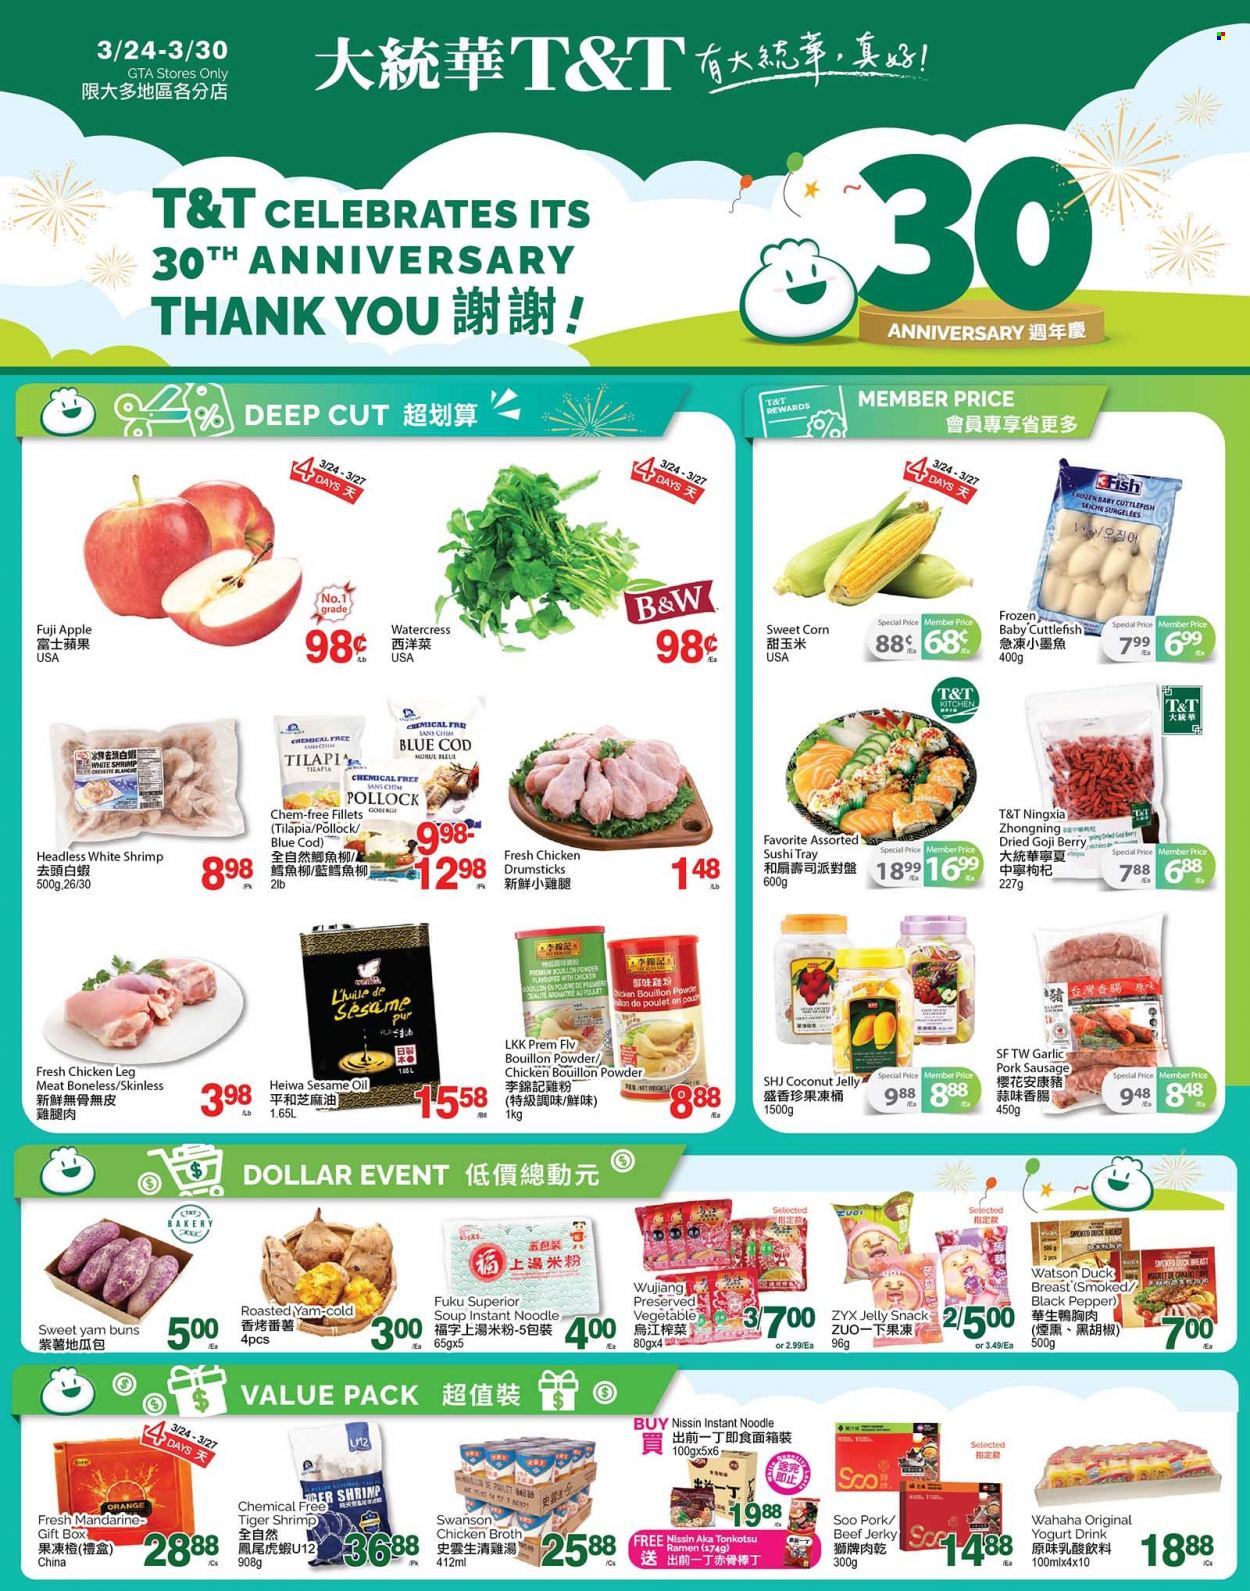 thumbnail - T&T Supermarket Flyer - March 24, 2023 - March 30, 2023 - Sales products - buns, corn, garlic, sweet corn, Fuji apple, coconut, oranges, cod, cuttlefish, tilapia, pollock, fish, shrimps, ramen, smoked duck, soup, noodles, Nissin, beef jerky, jerky, sausage, pork sausage, yoghurt, yoghurt drink, snack, jelly, bouillon, chicken broth, broth, watercress, black pepper, sesame oil, goji, chicken legs, chicken drumsticks, chicken, duck meat, duck breasts, Scott, gift box, tray, pan. Page 1.